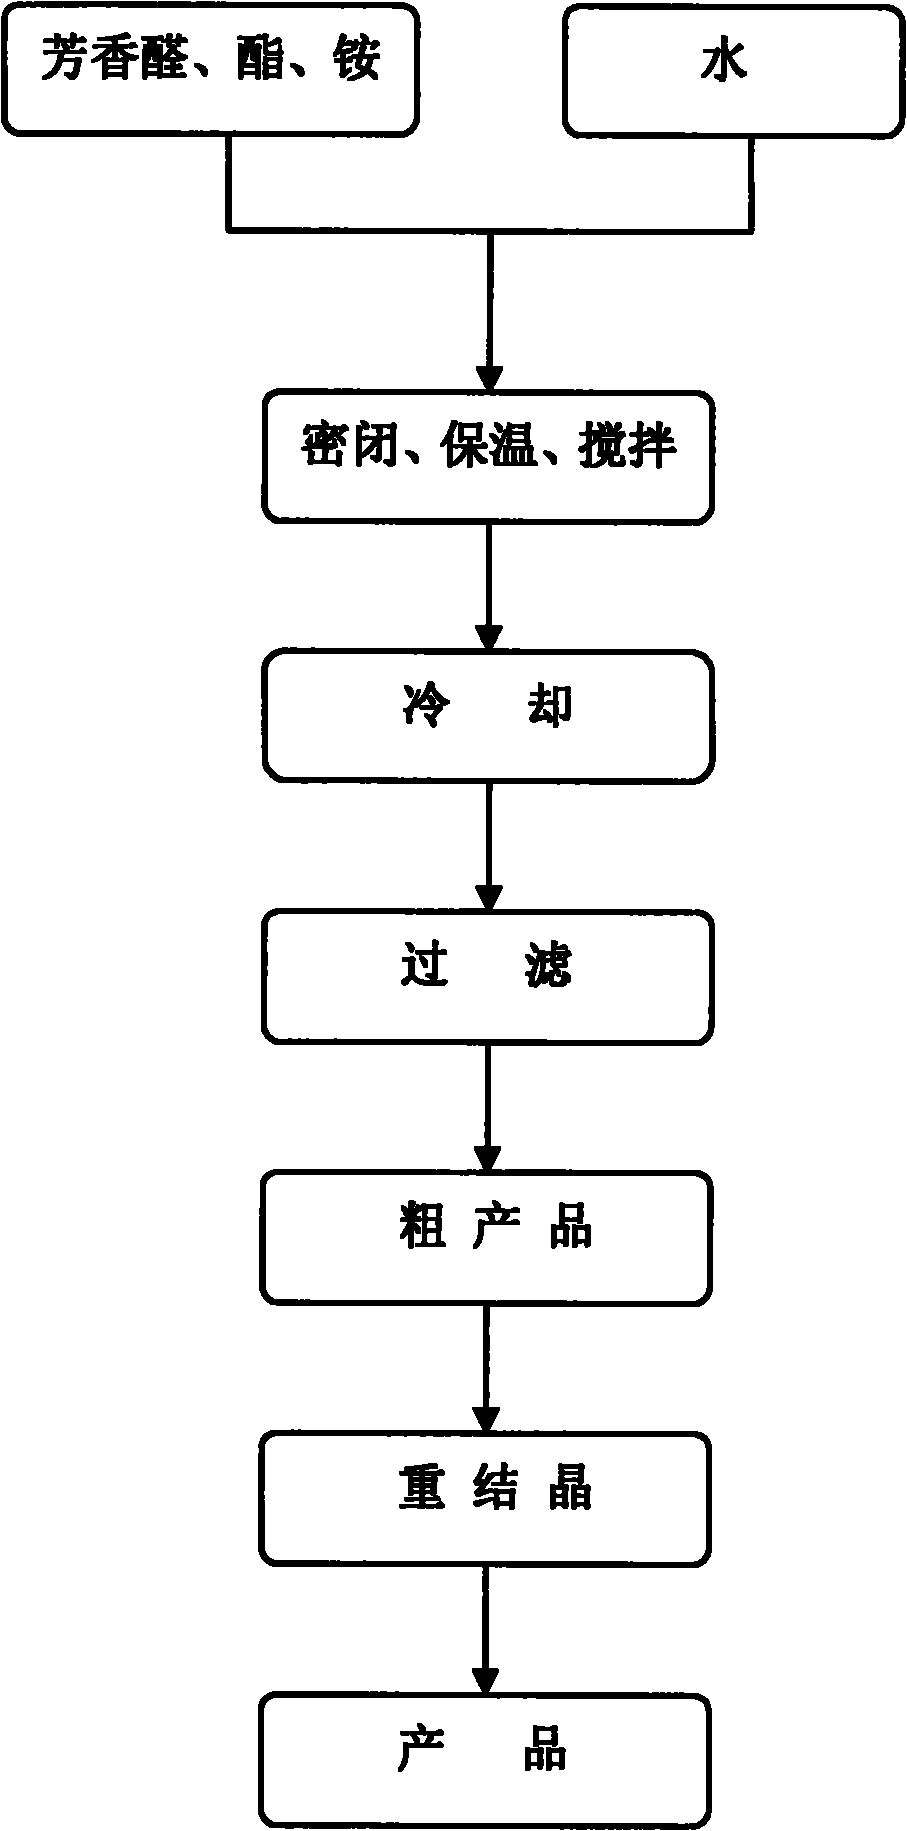 Water phase clean synthesis method of 1,4-dihydropyridine compounds